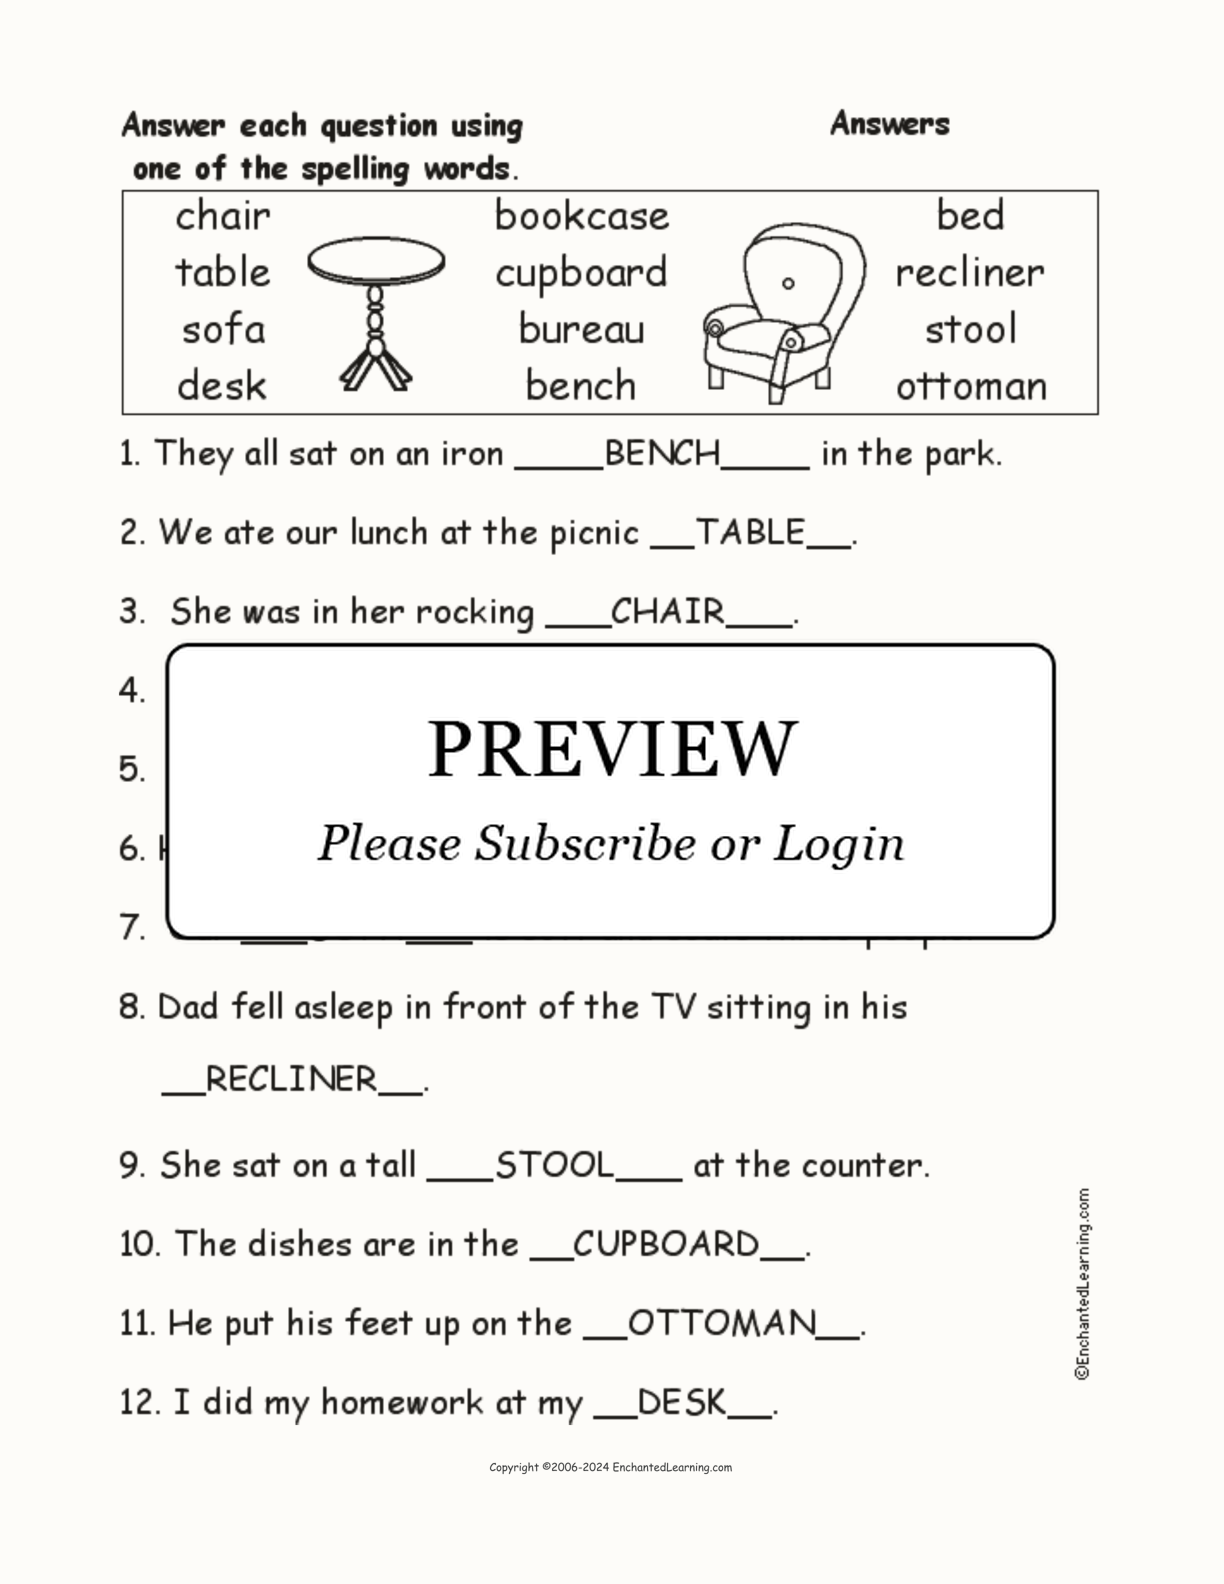 Furniture Spelling Word Questions interactive worksheet page 2